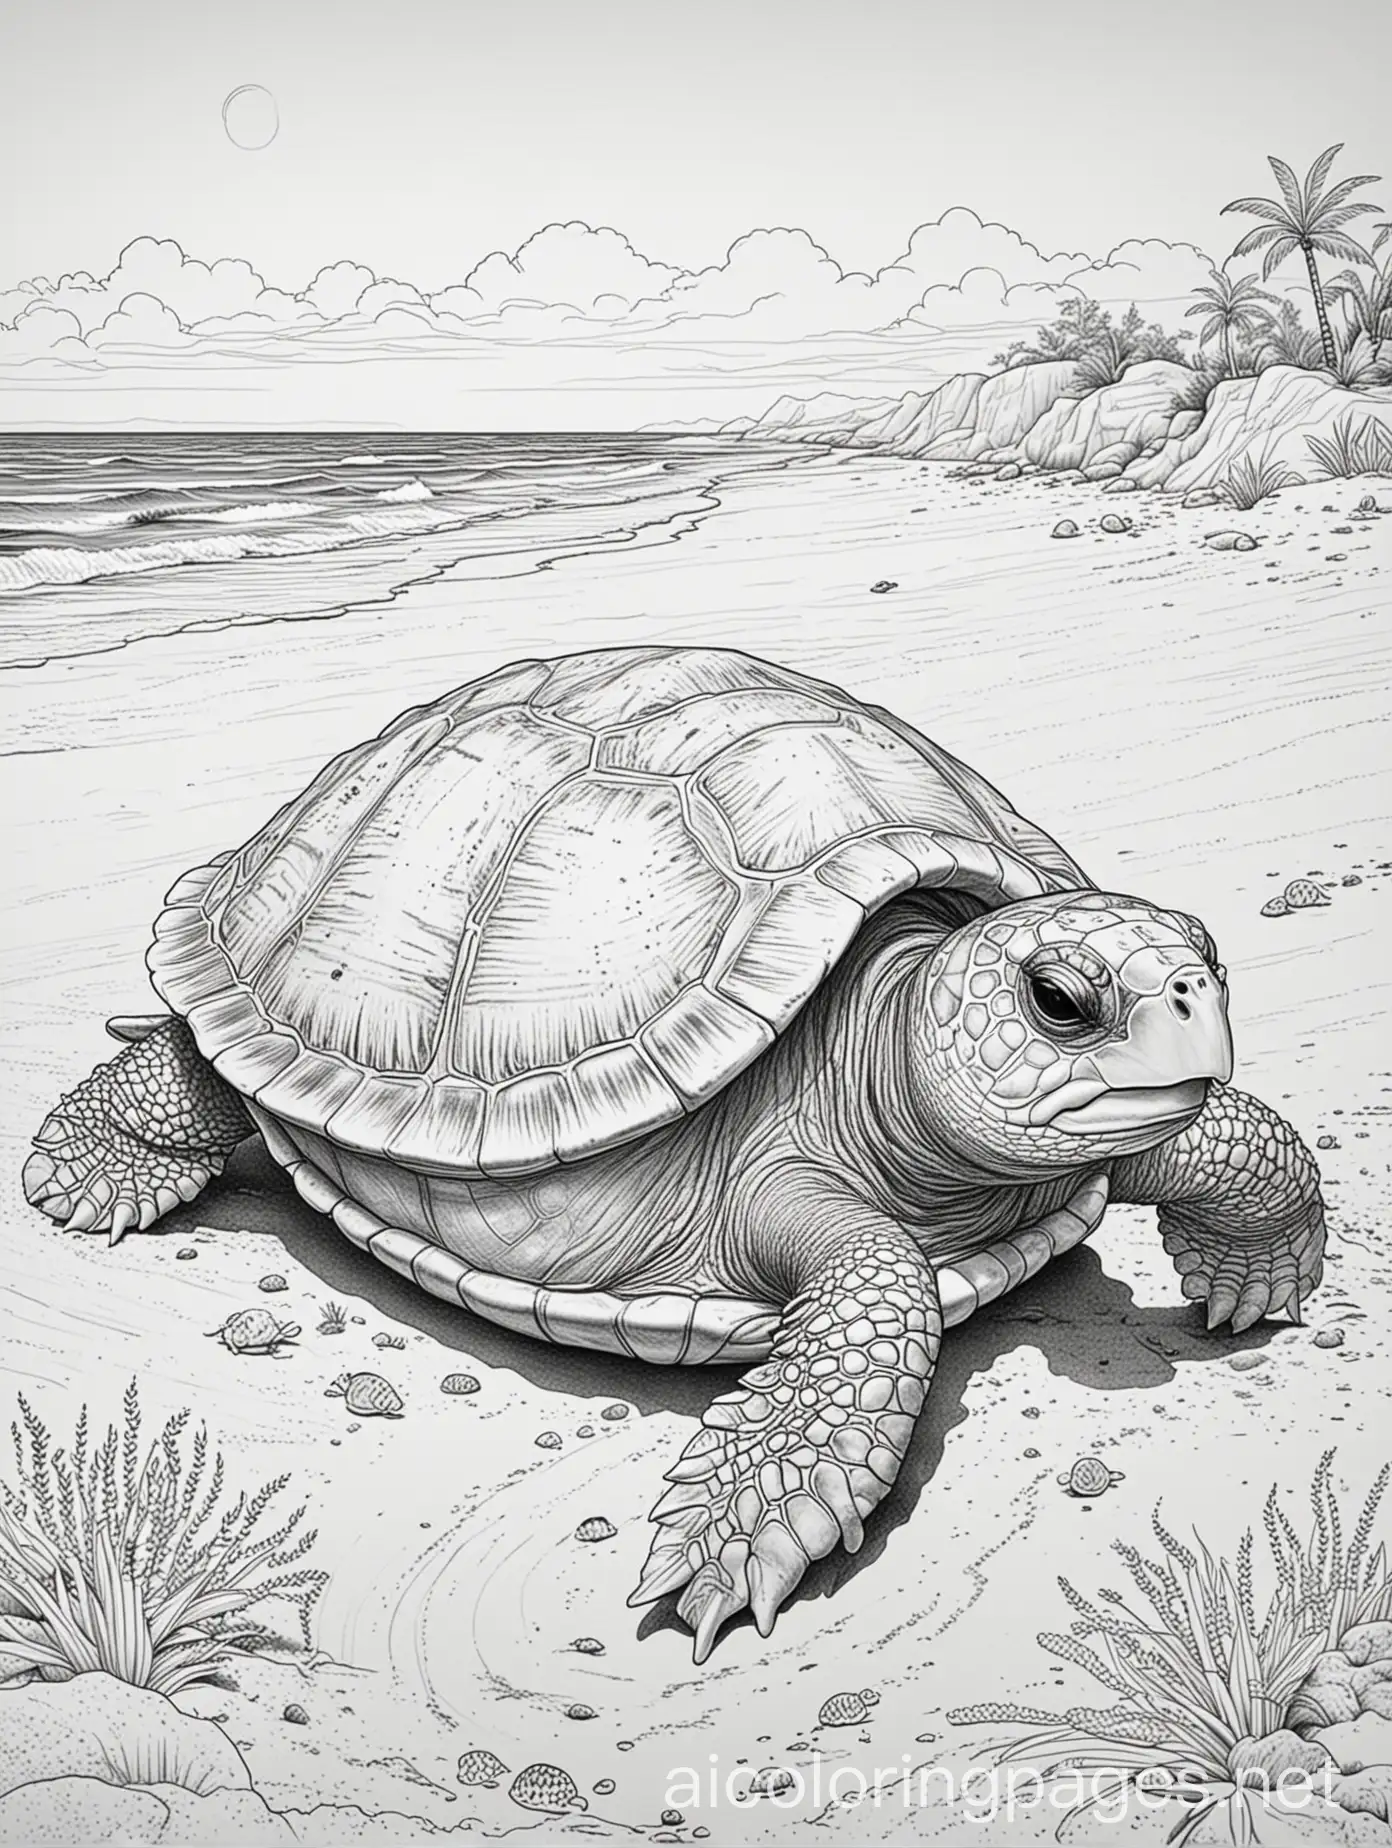 Relaxing-Turtle-Coloring-Page-for-Kids-5-and-Up-Beach-Scene-in-Black-and-White